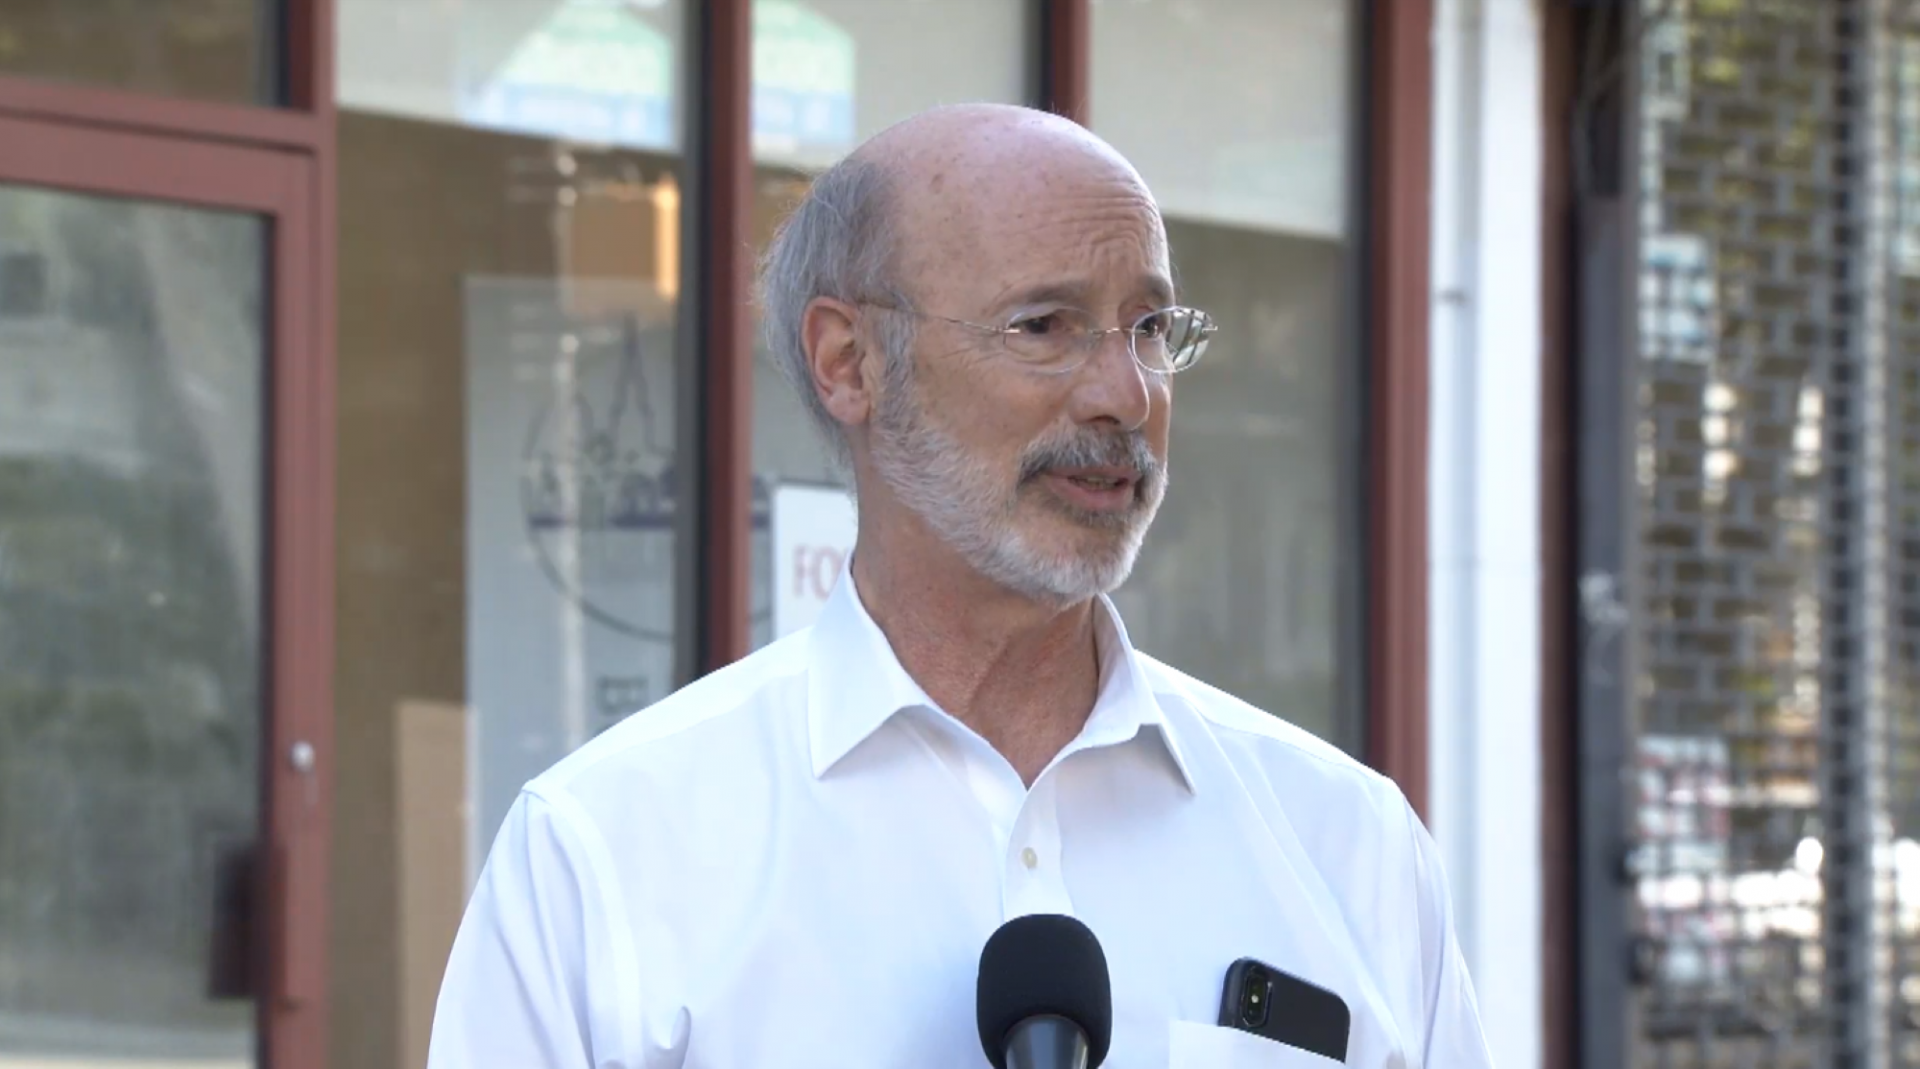 Gov. Tom Wolf speaks to reporters Monday evening in Philadelphia, where he was touring parts of the city damaged during the weekend’s protests over the death of George Floyd in Minneapolis.